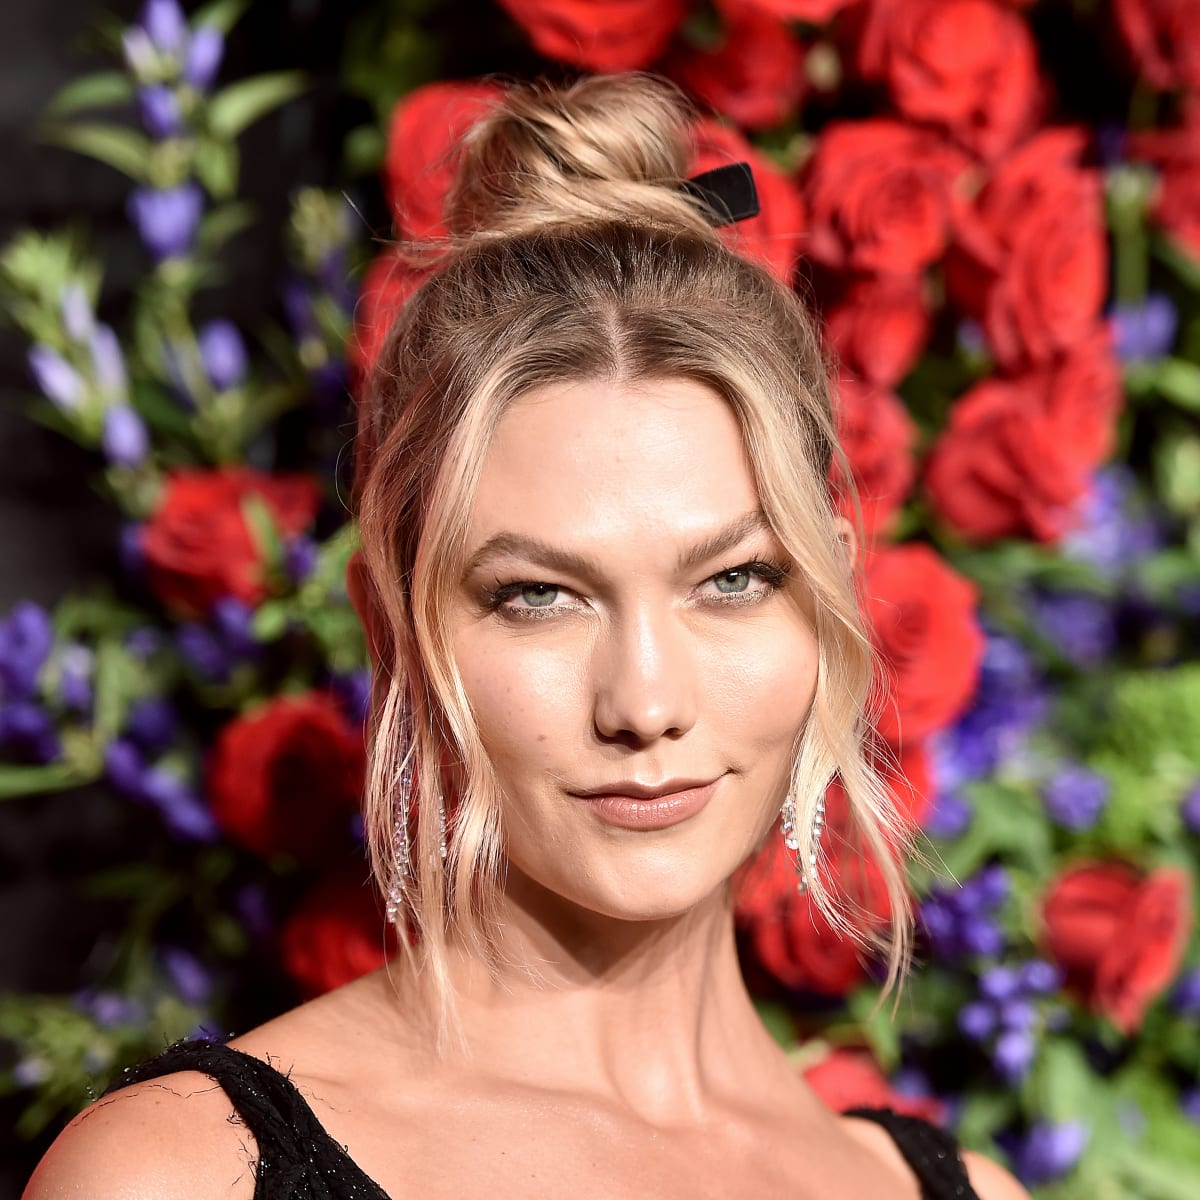 Karlie Kloss Is Entering the Metaverse With Roblox